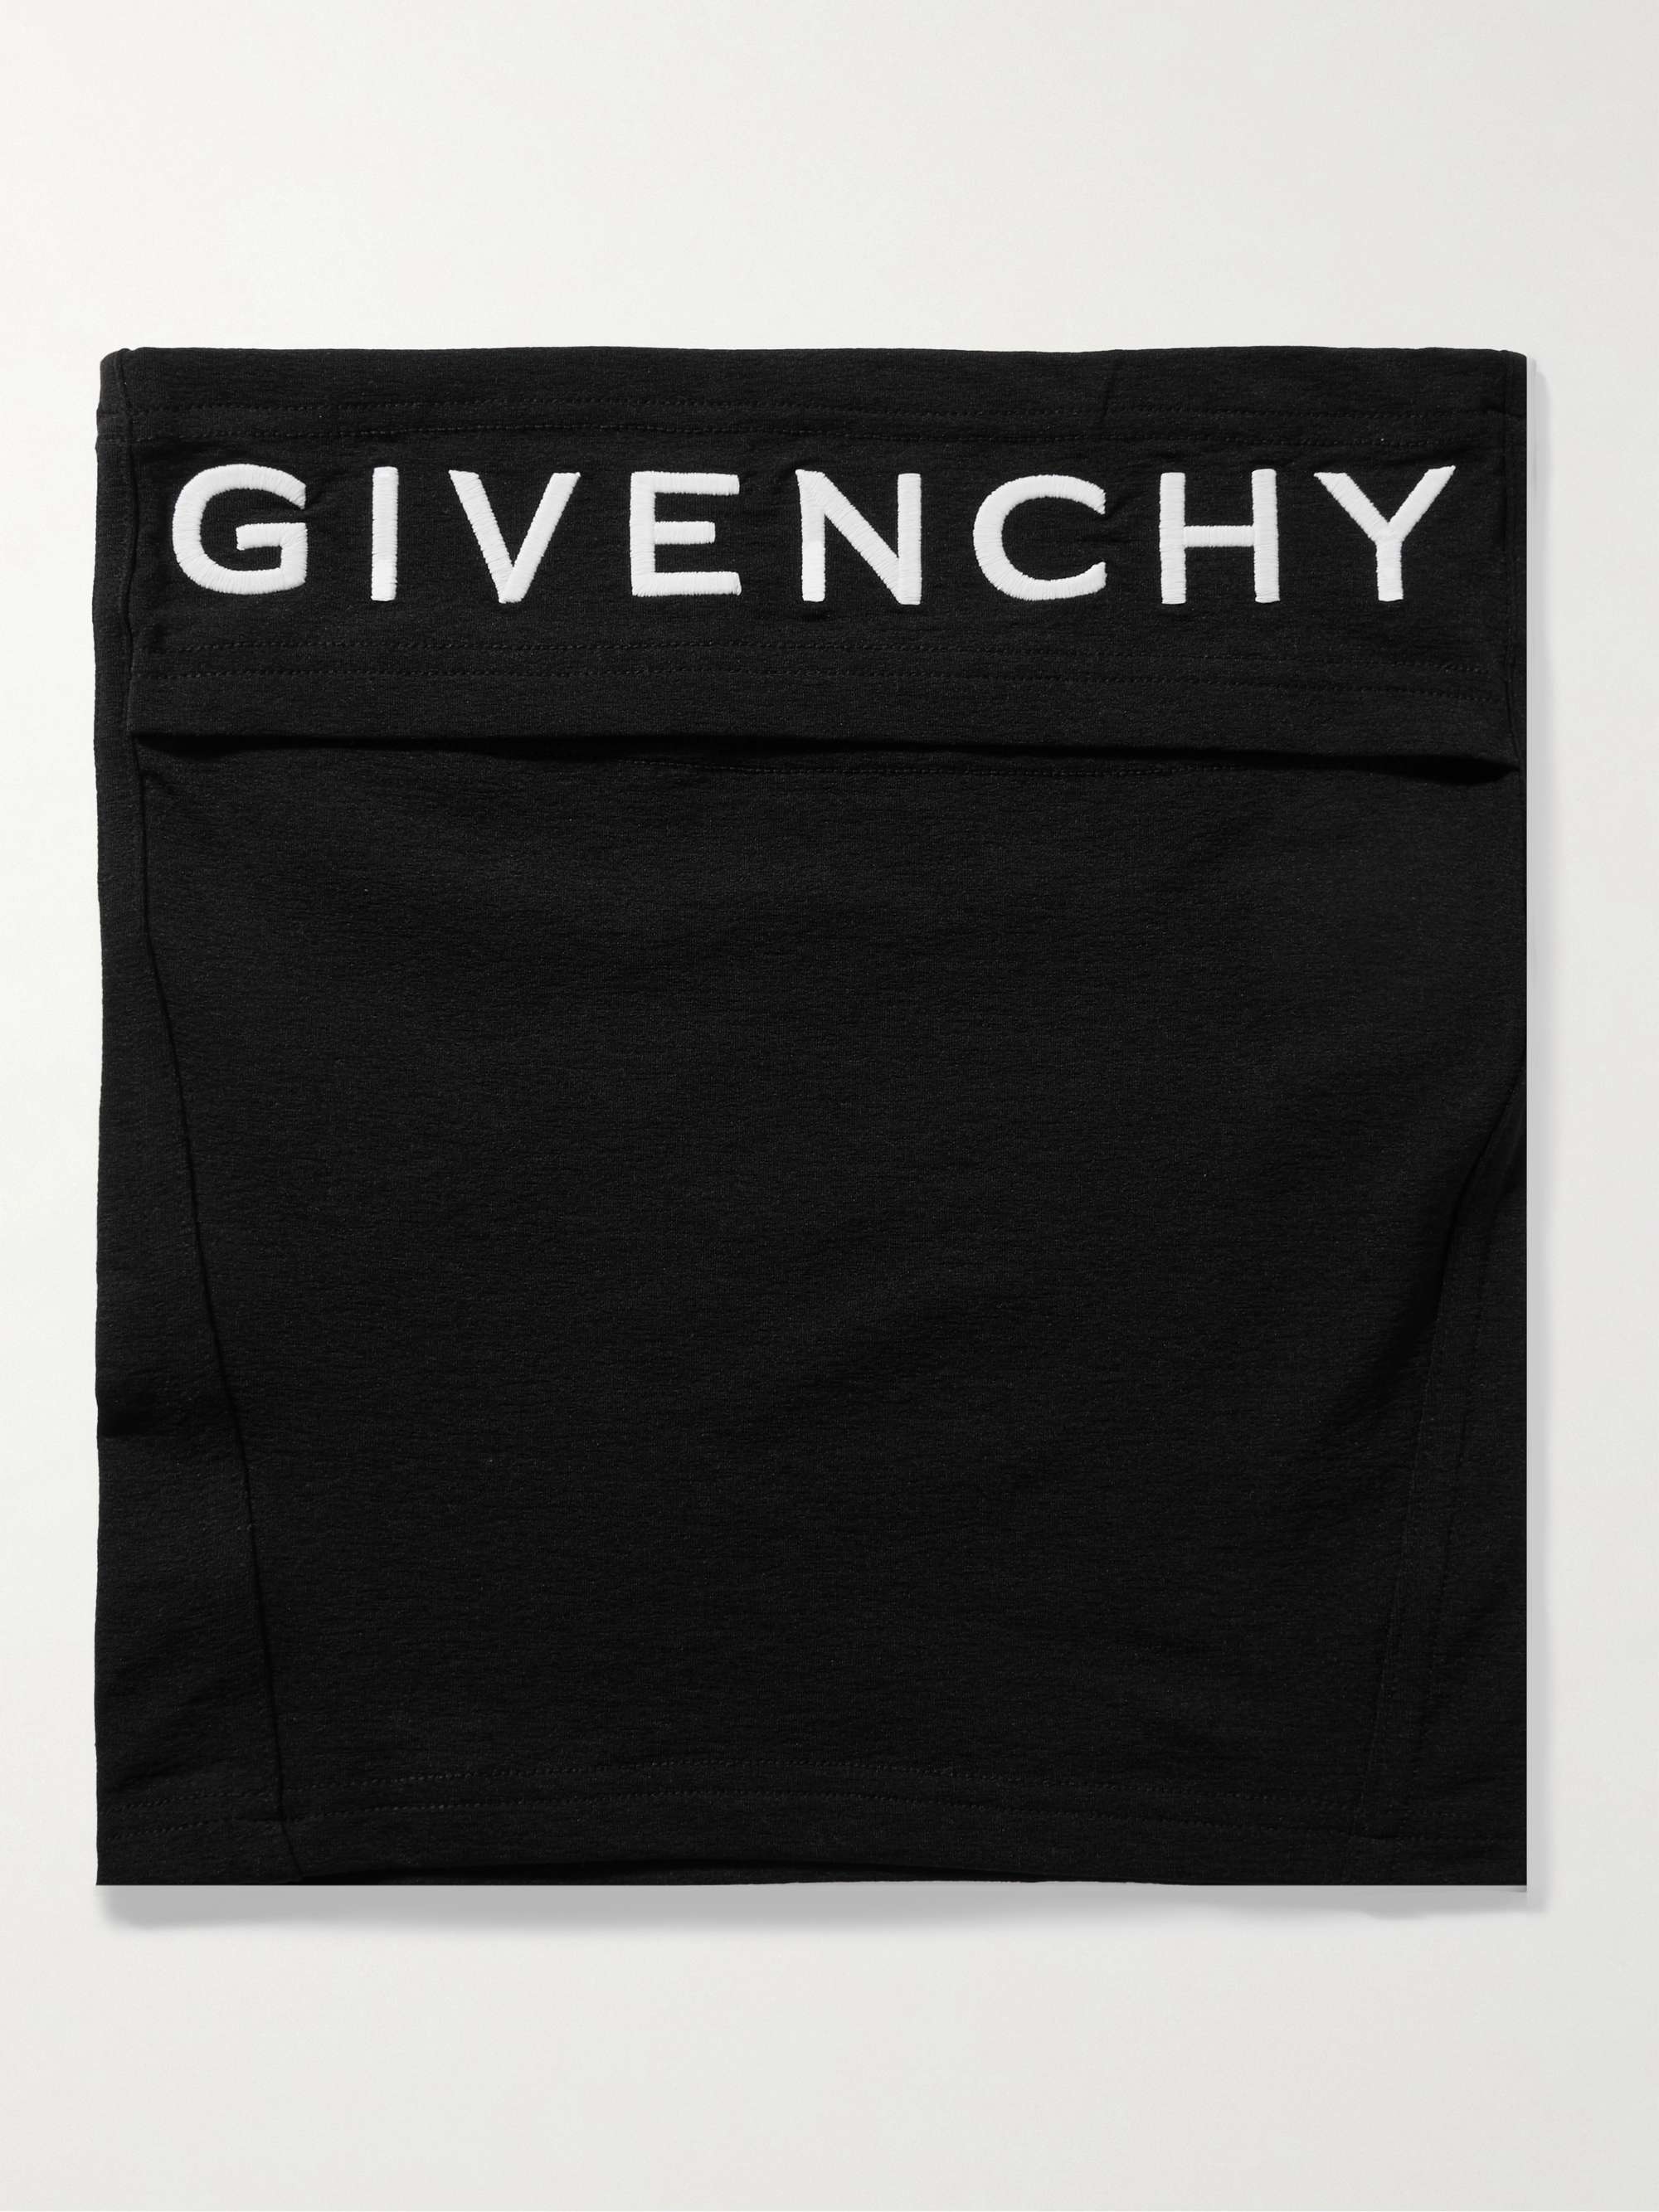 Givenchy - Single - Album by Hallow - Apple Music